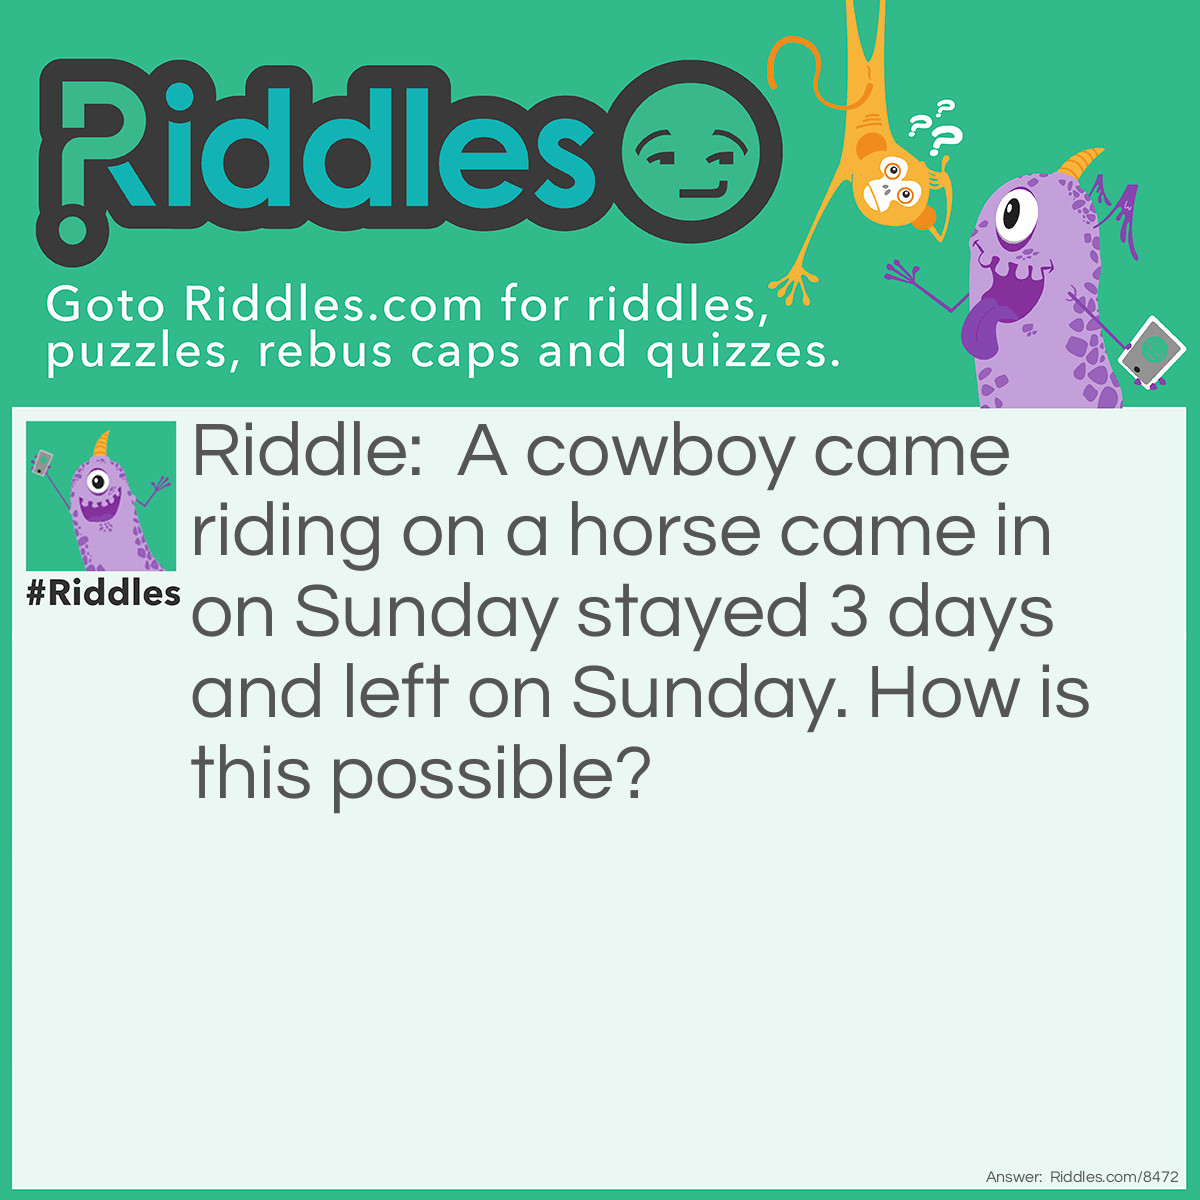 Riddle: A cowboy came riding on a horse came in on Sunday stayed 3 days and left on Sunday. How is this possible? Answer: The horses name in Sunday.